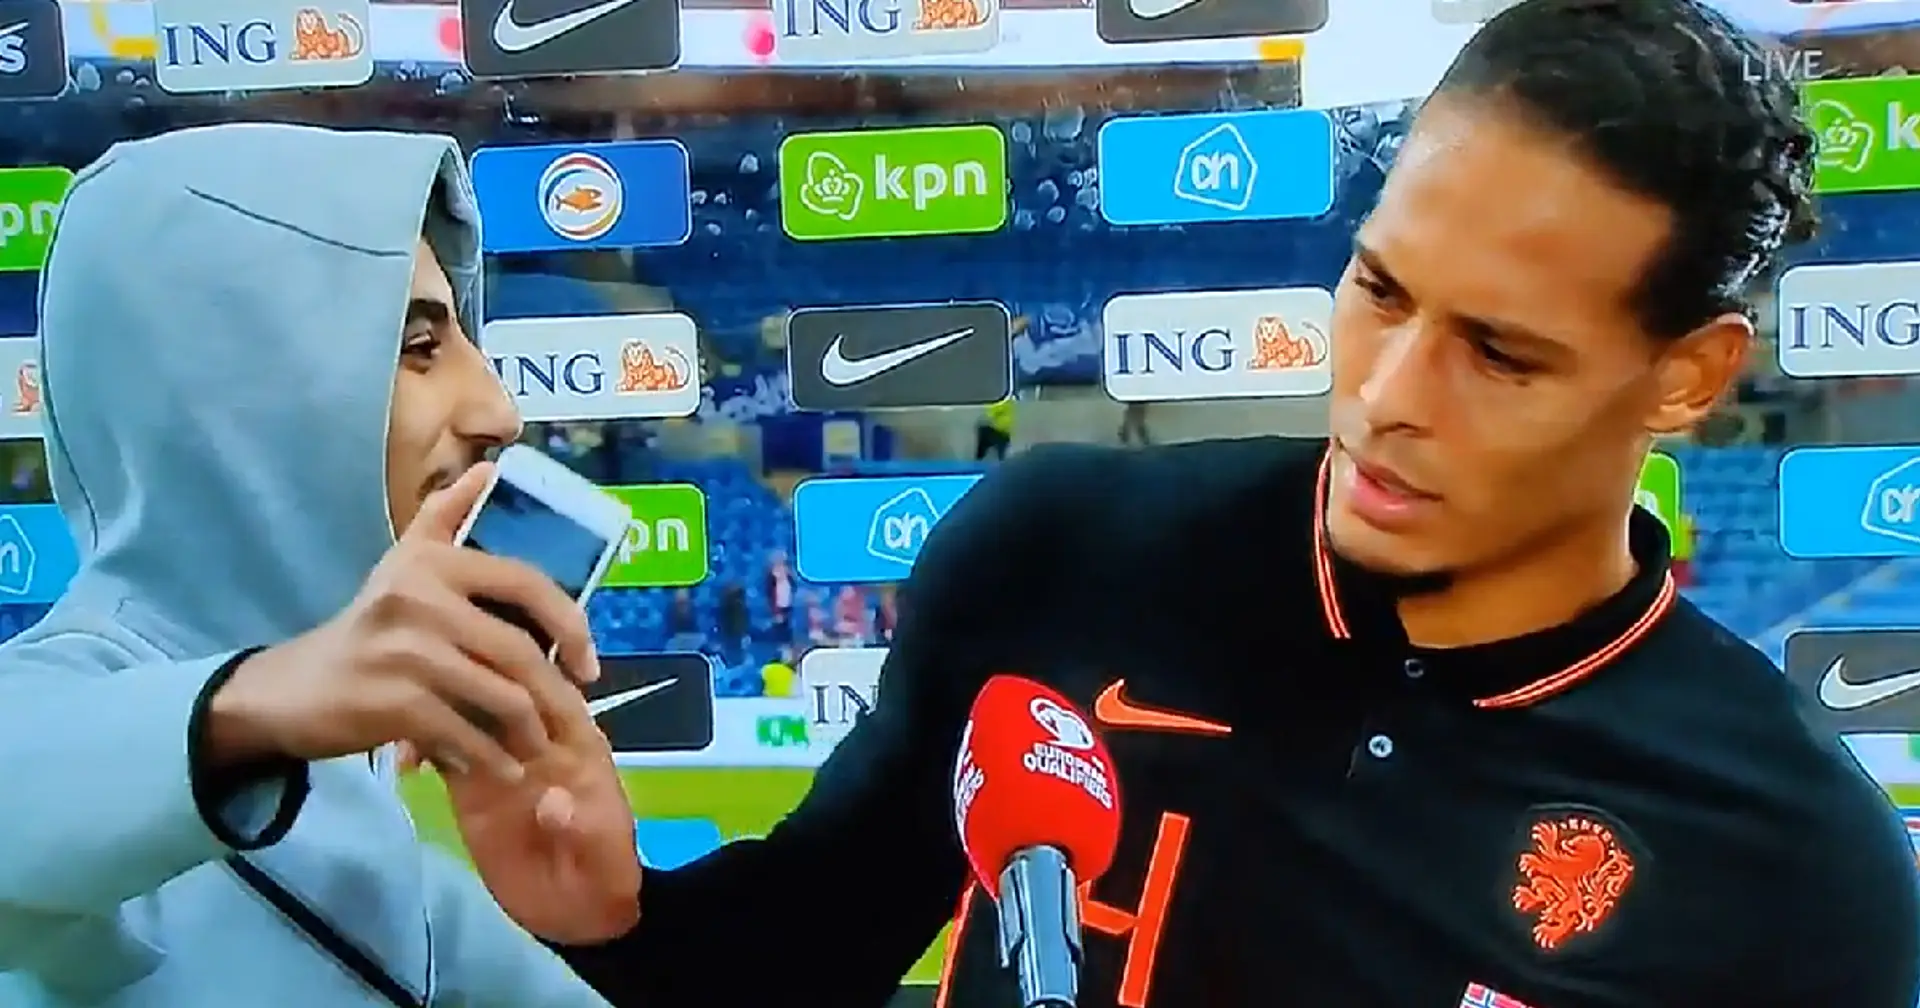 Fan tries to hug VVD during post-match interview for Netherlands, Virg calmly deals with it - spotted